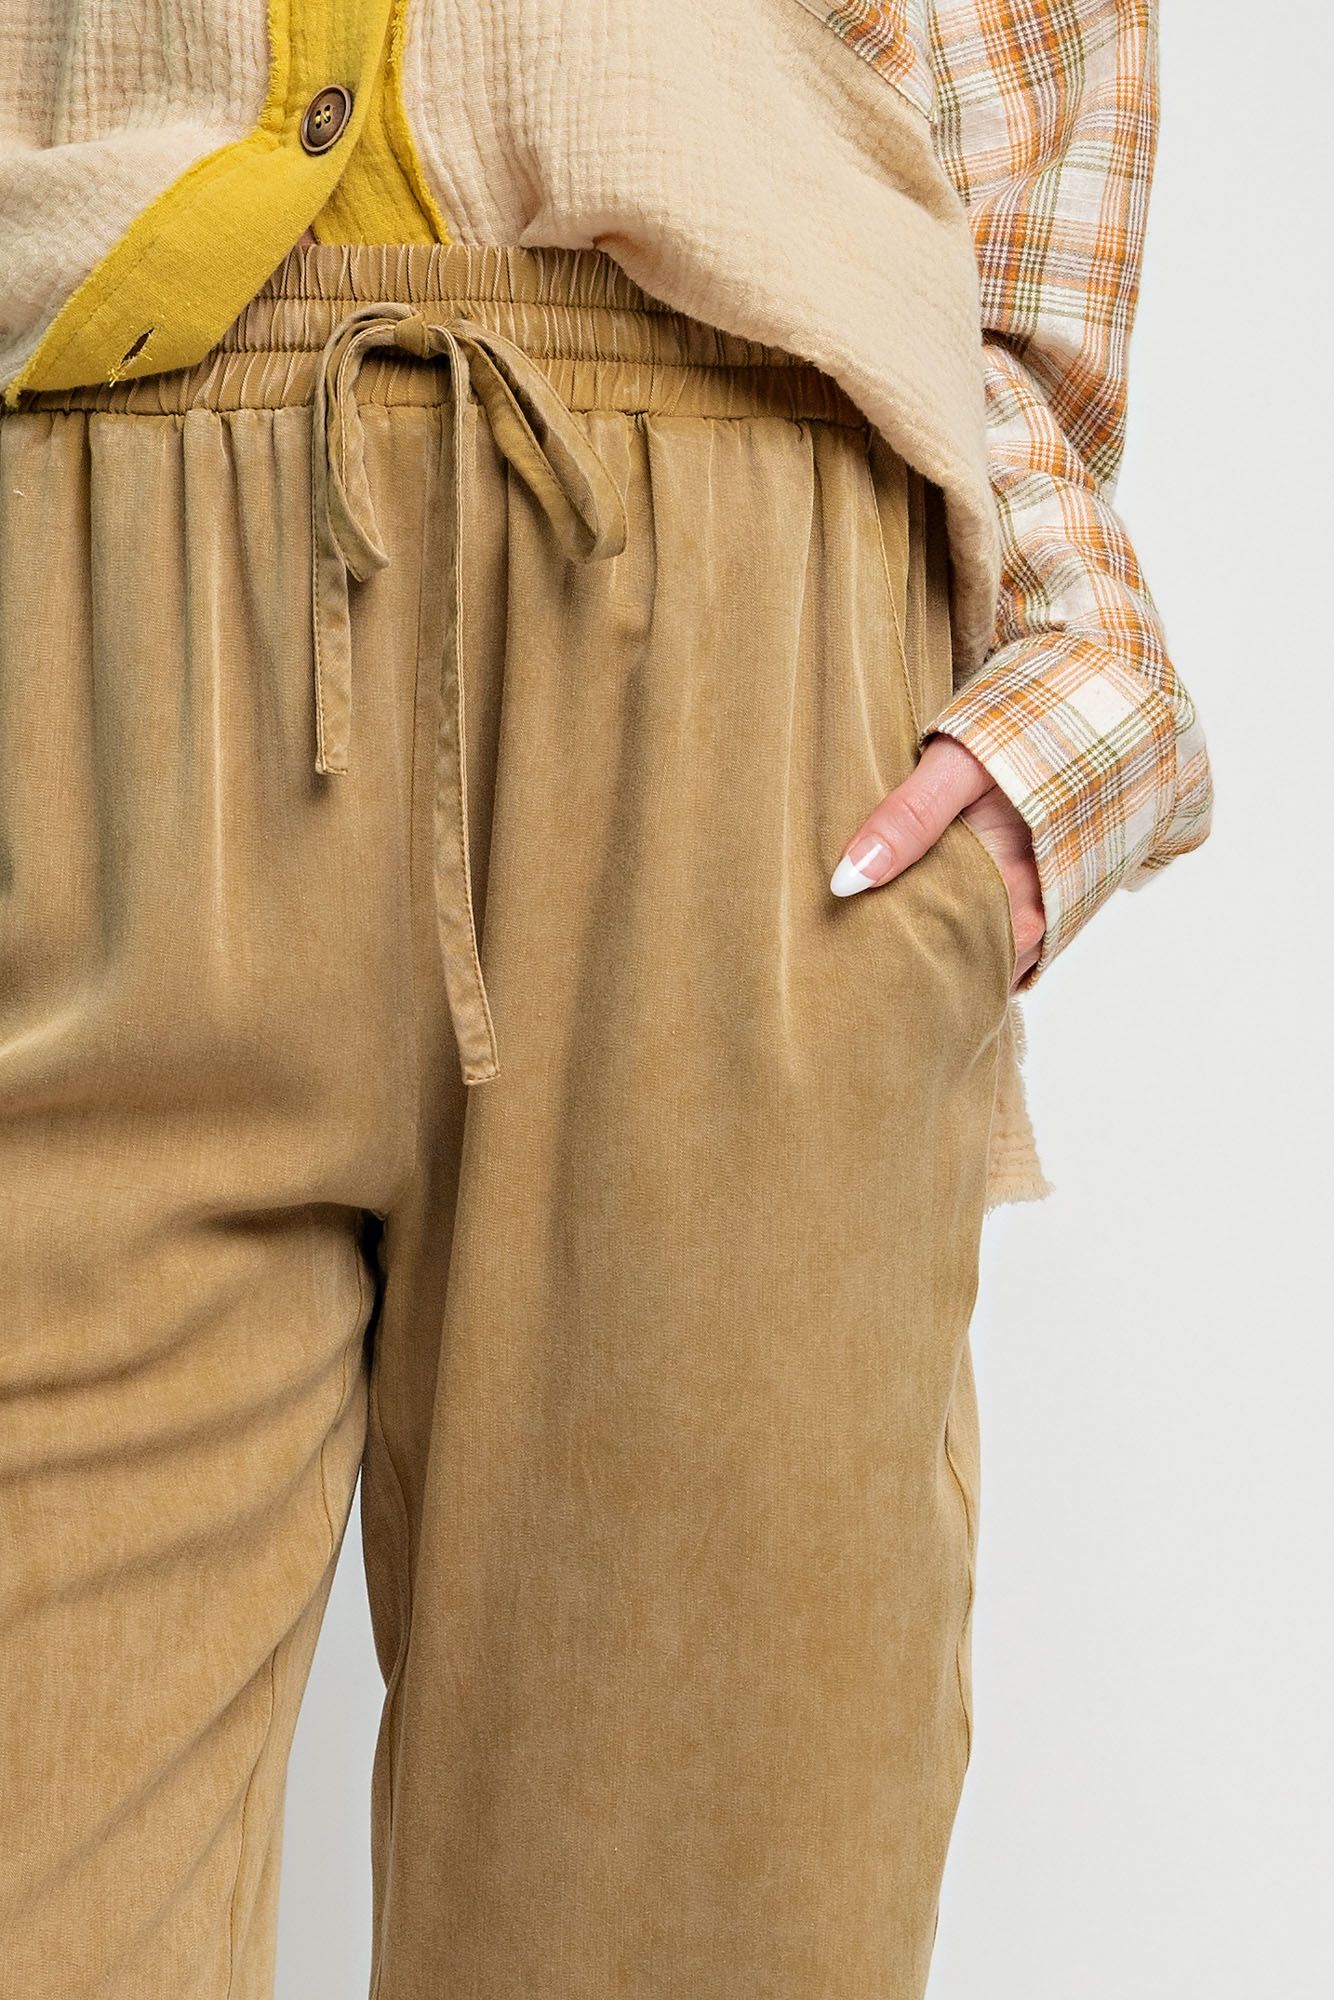 The Devon Jogger Mineral Washed Jogger Pants in Faded Olive